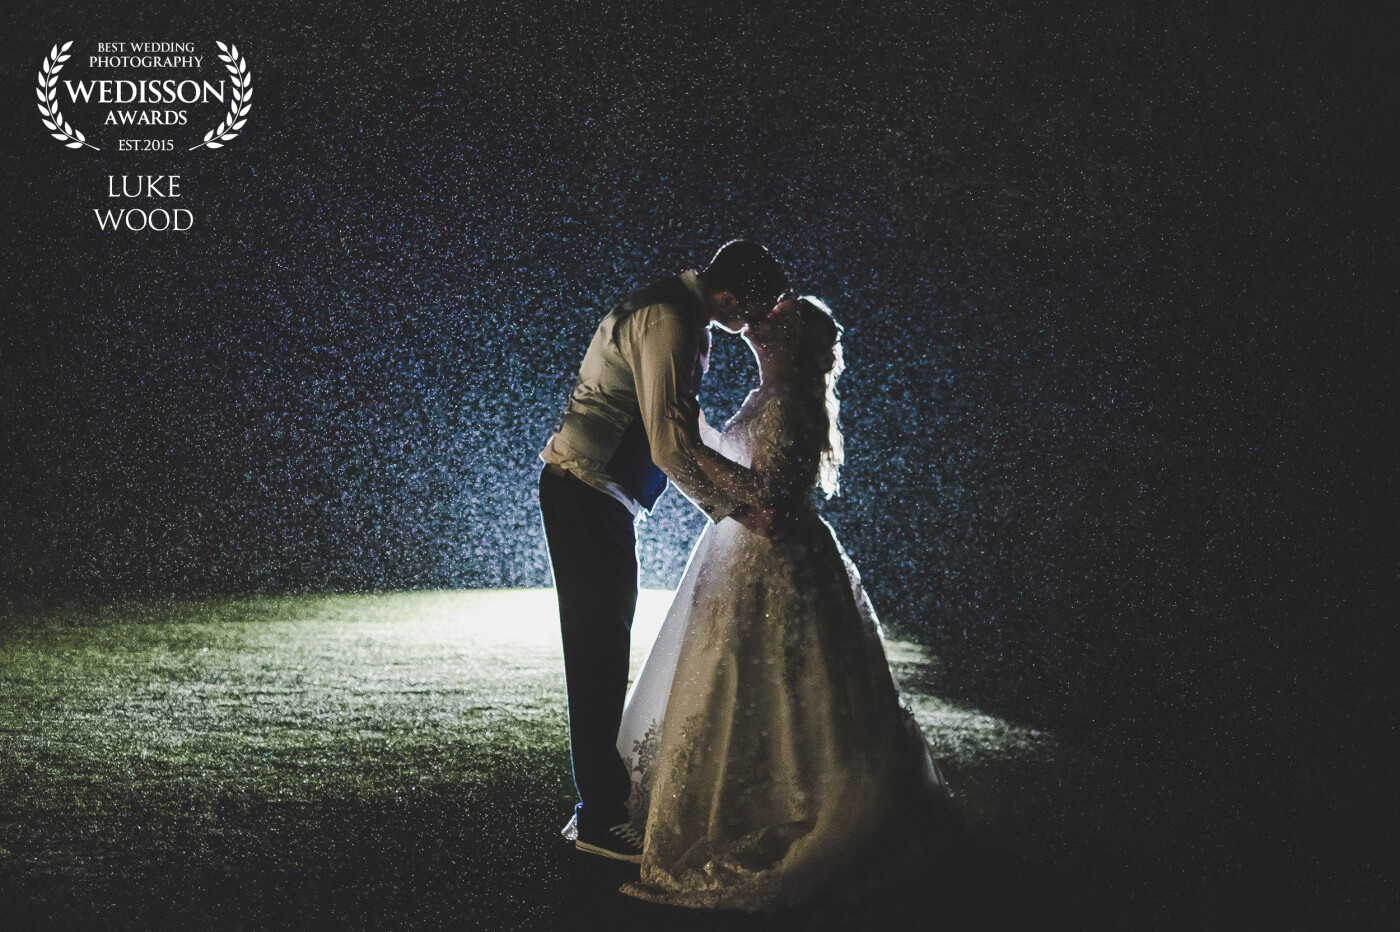 It rained non stop for Tara & Marks wedding at Carylon Bay in Cornwall, we managed to get a few photos around the hotel grounds during the day with umbrella's but I wanted to give them something special before leaving for the day, I set out onto the golf clubs green and set up my flash with my triggers, I did a couple test shots using my second shooter in the frame so I could get my settings right then the bride and groom came outside for us to fire off a few photos, we are really happy with how magical it came out with the rain drops being lit up like stars.